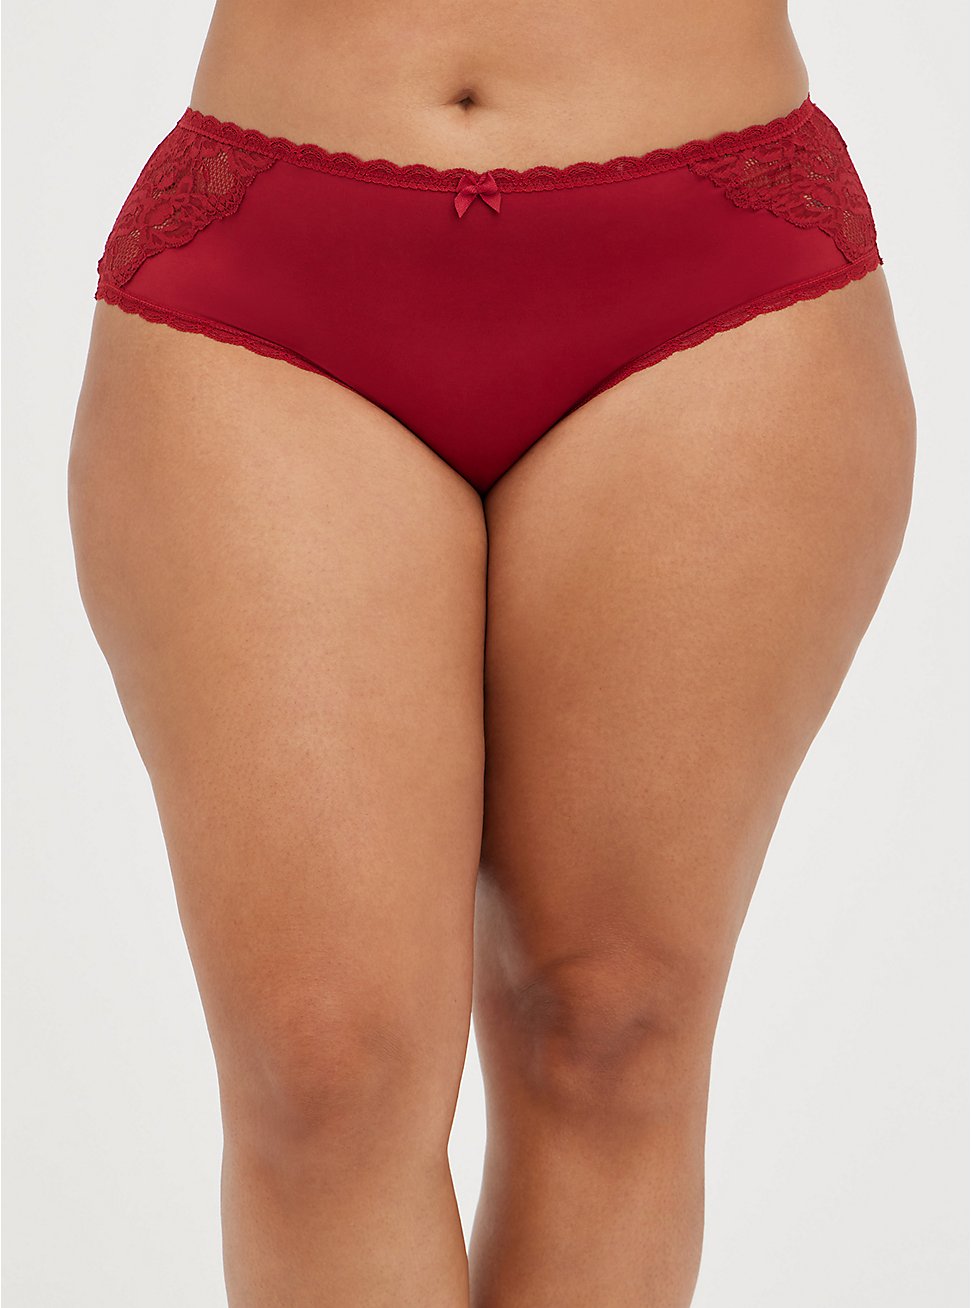 Plus Size Lattice Back Hipster Panty - Microfiber & Lace Red, BIKING RED, hi-res